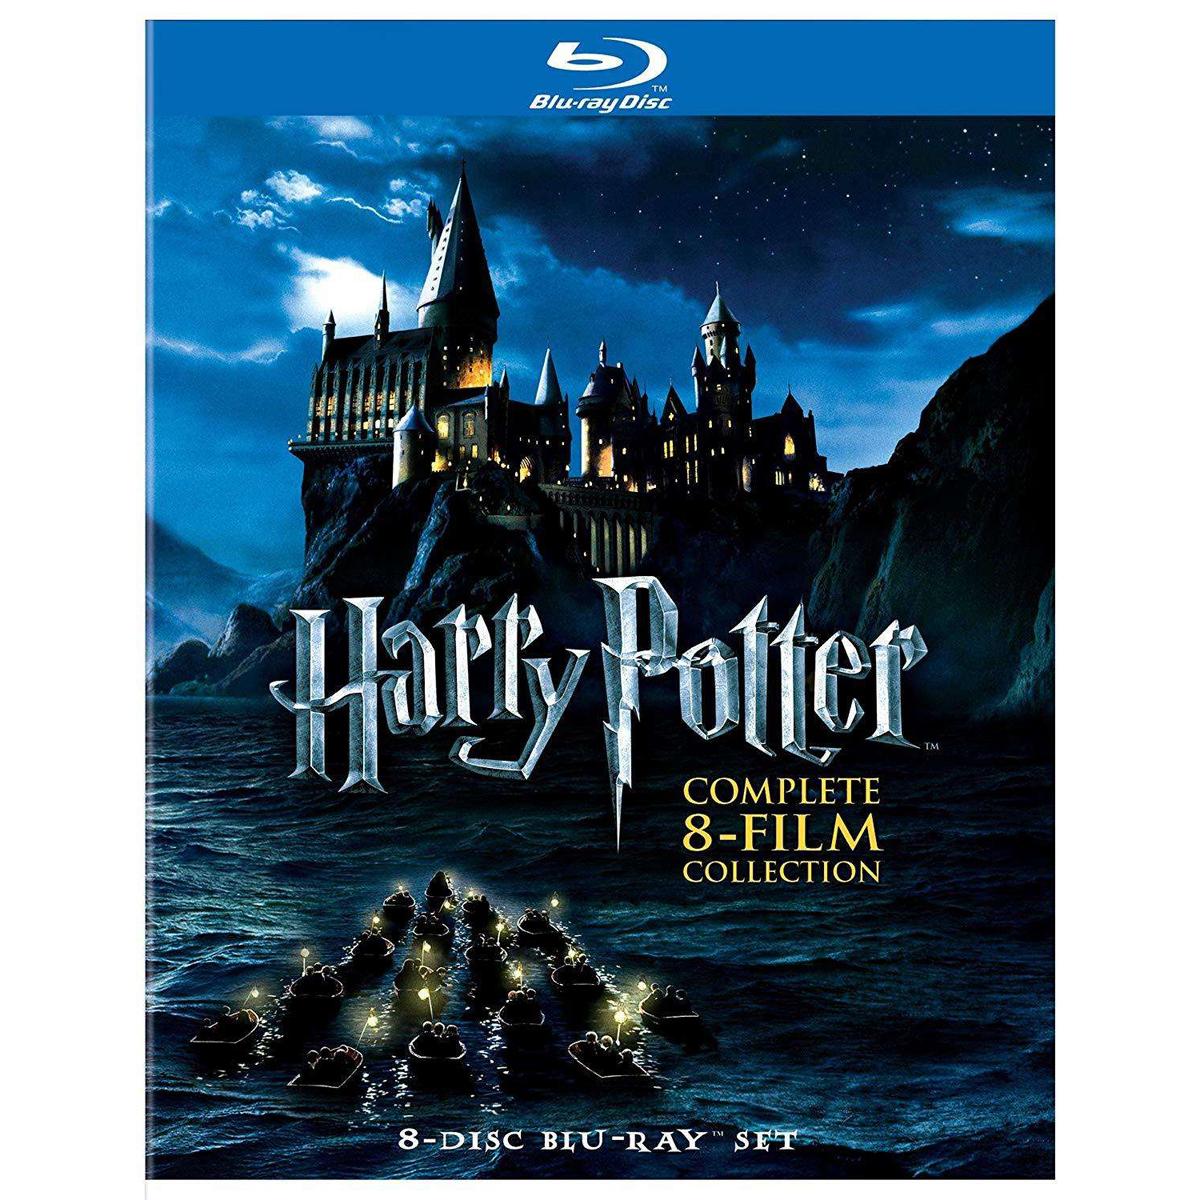 Harry Potter 8-Film Collection Digital HD for $7.99